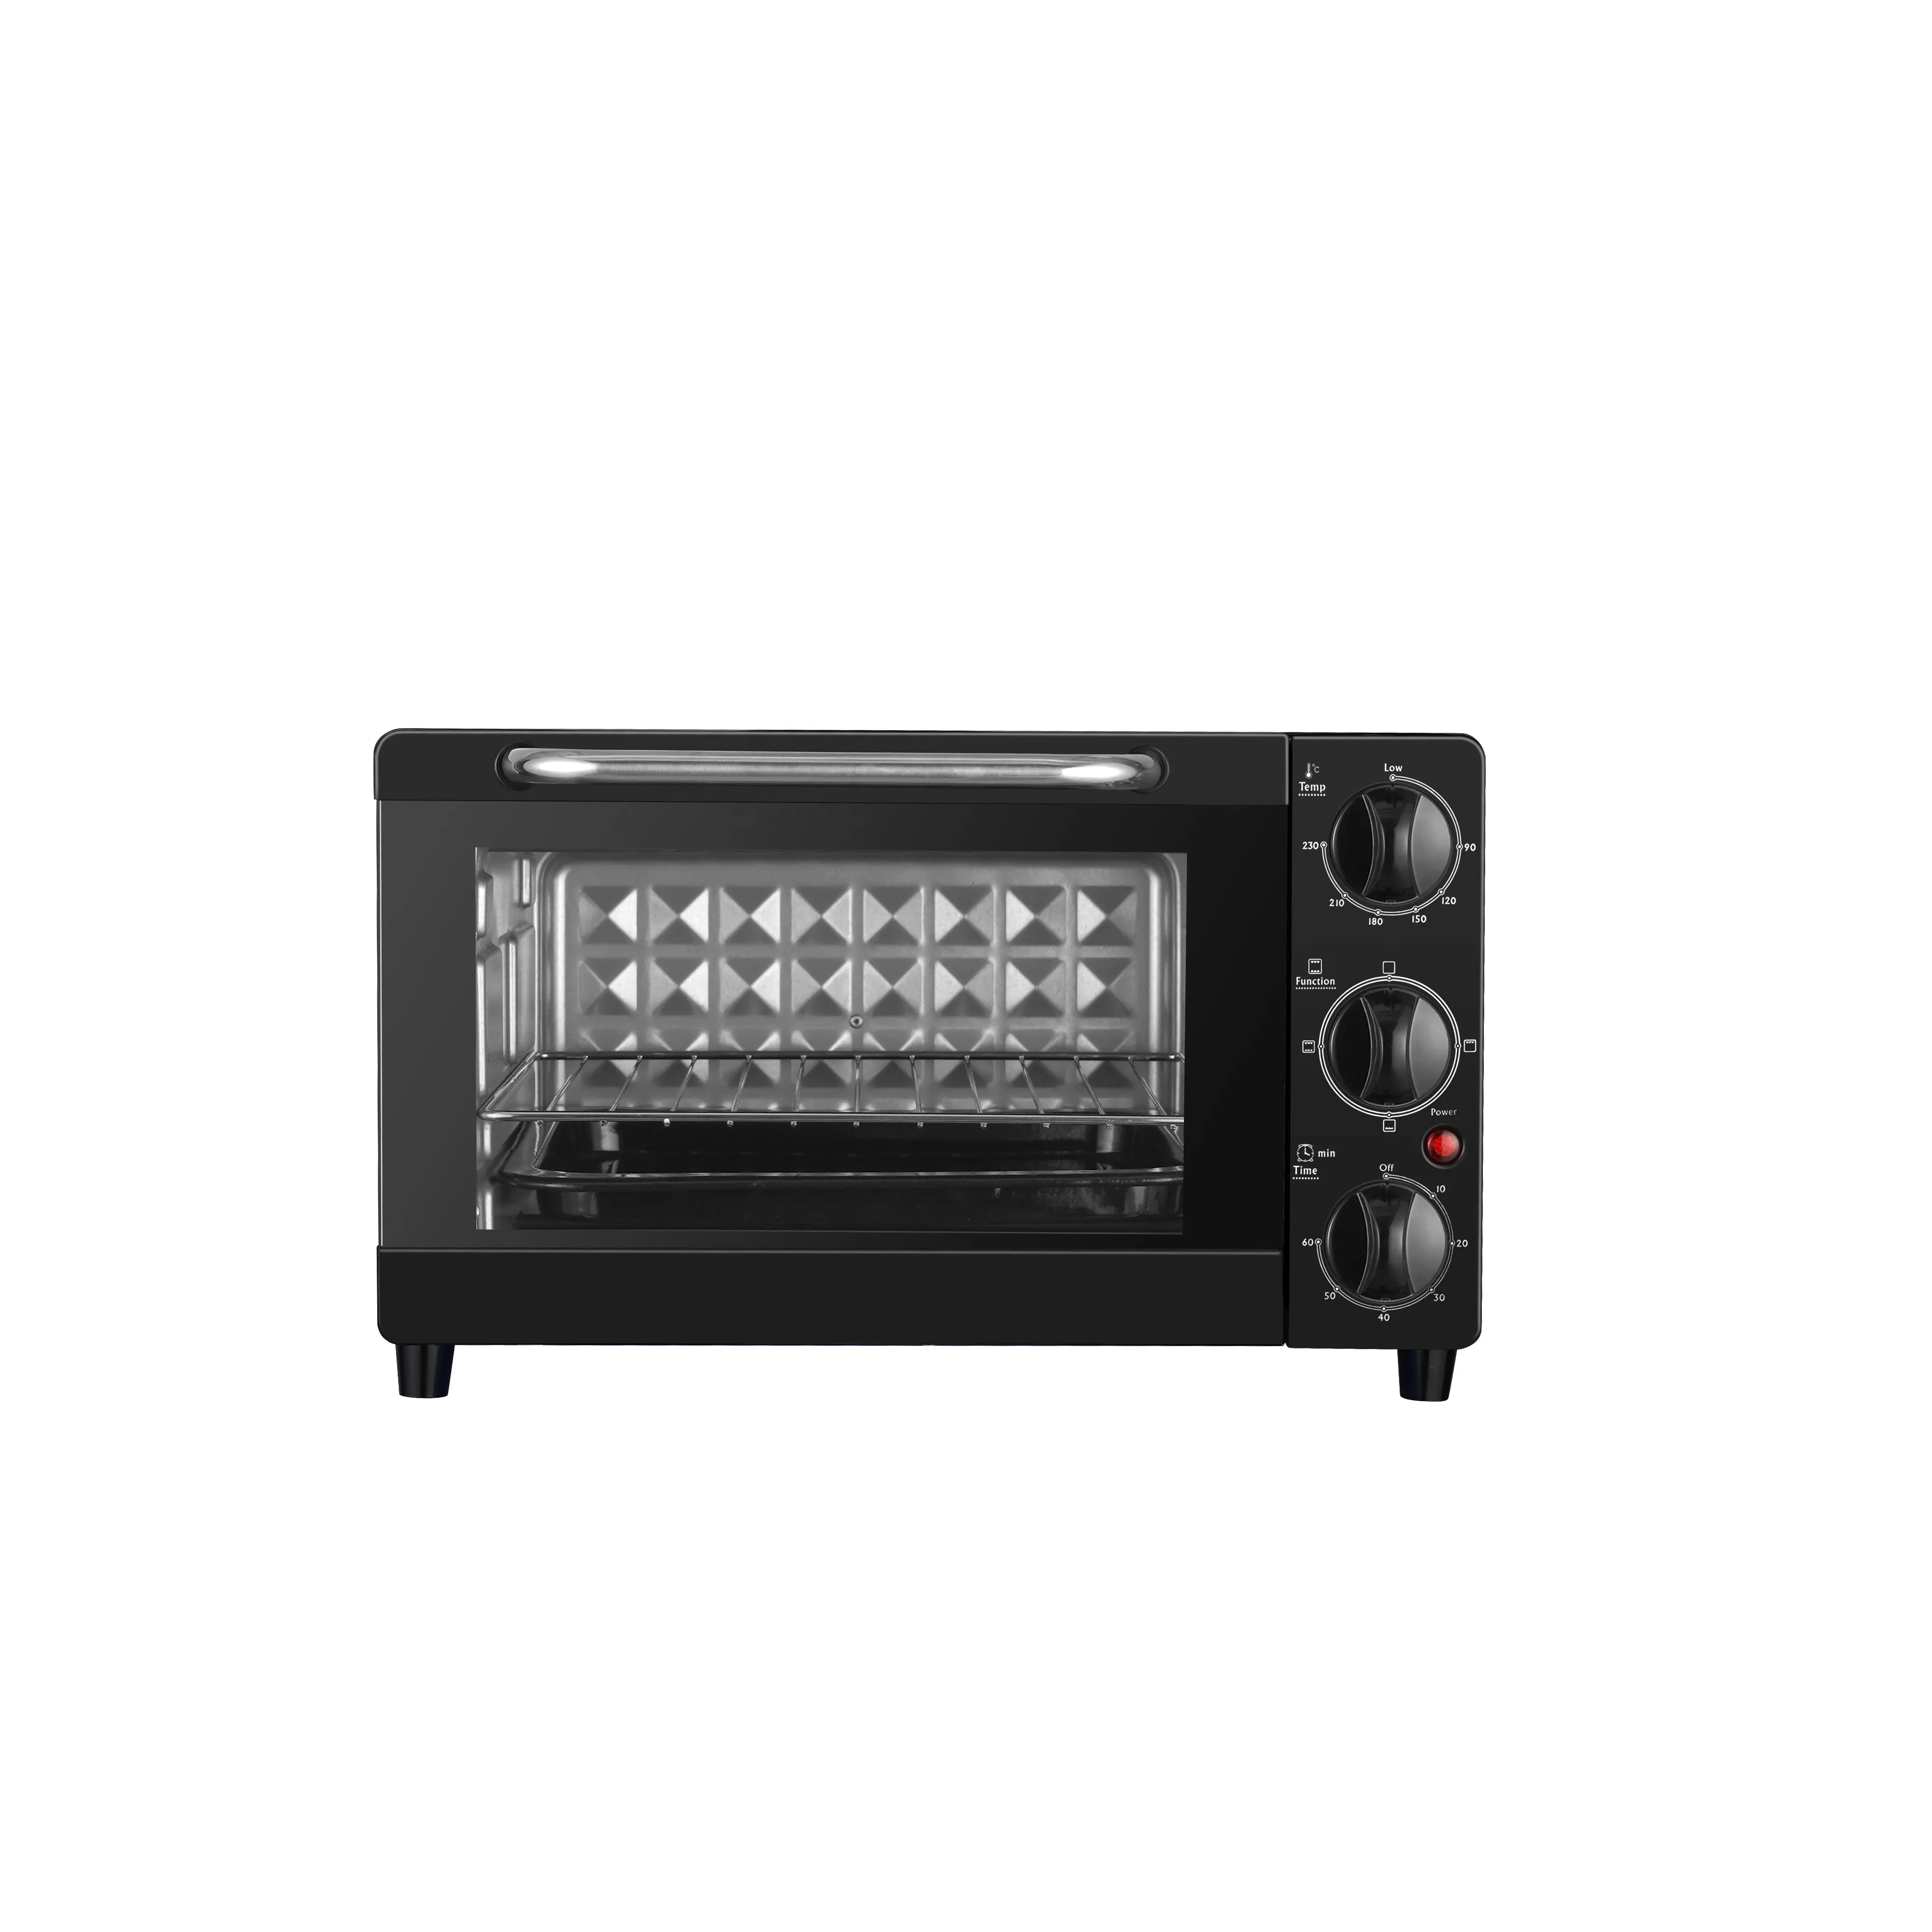 1300W home electric toast oven 15L